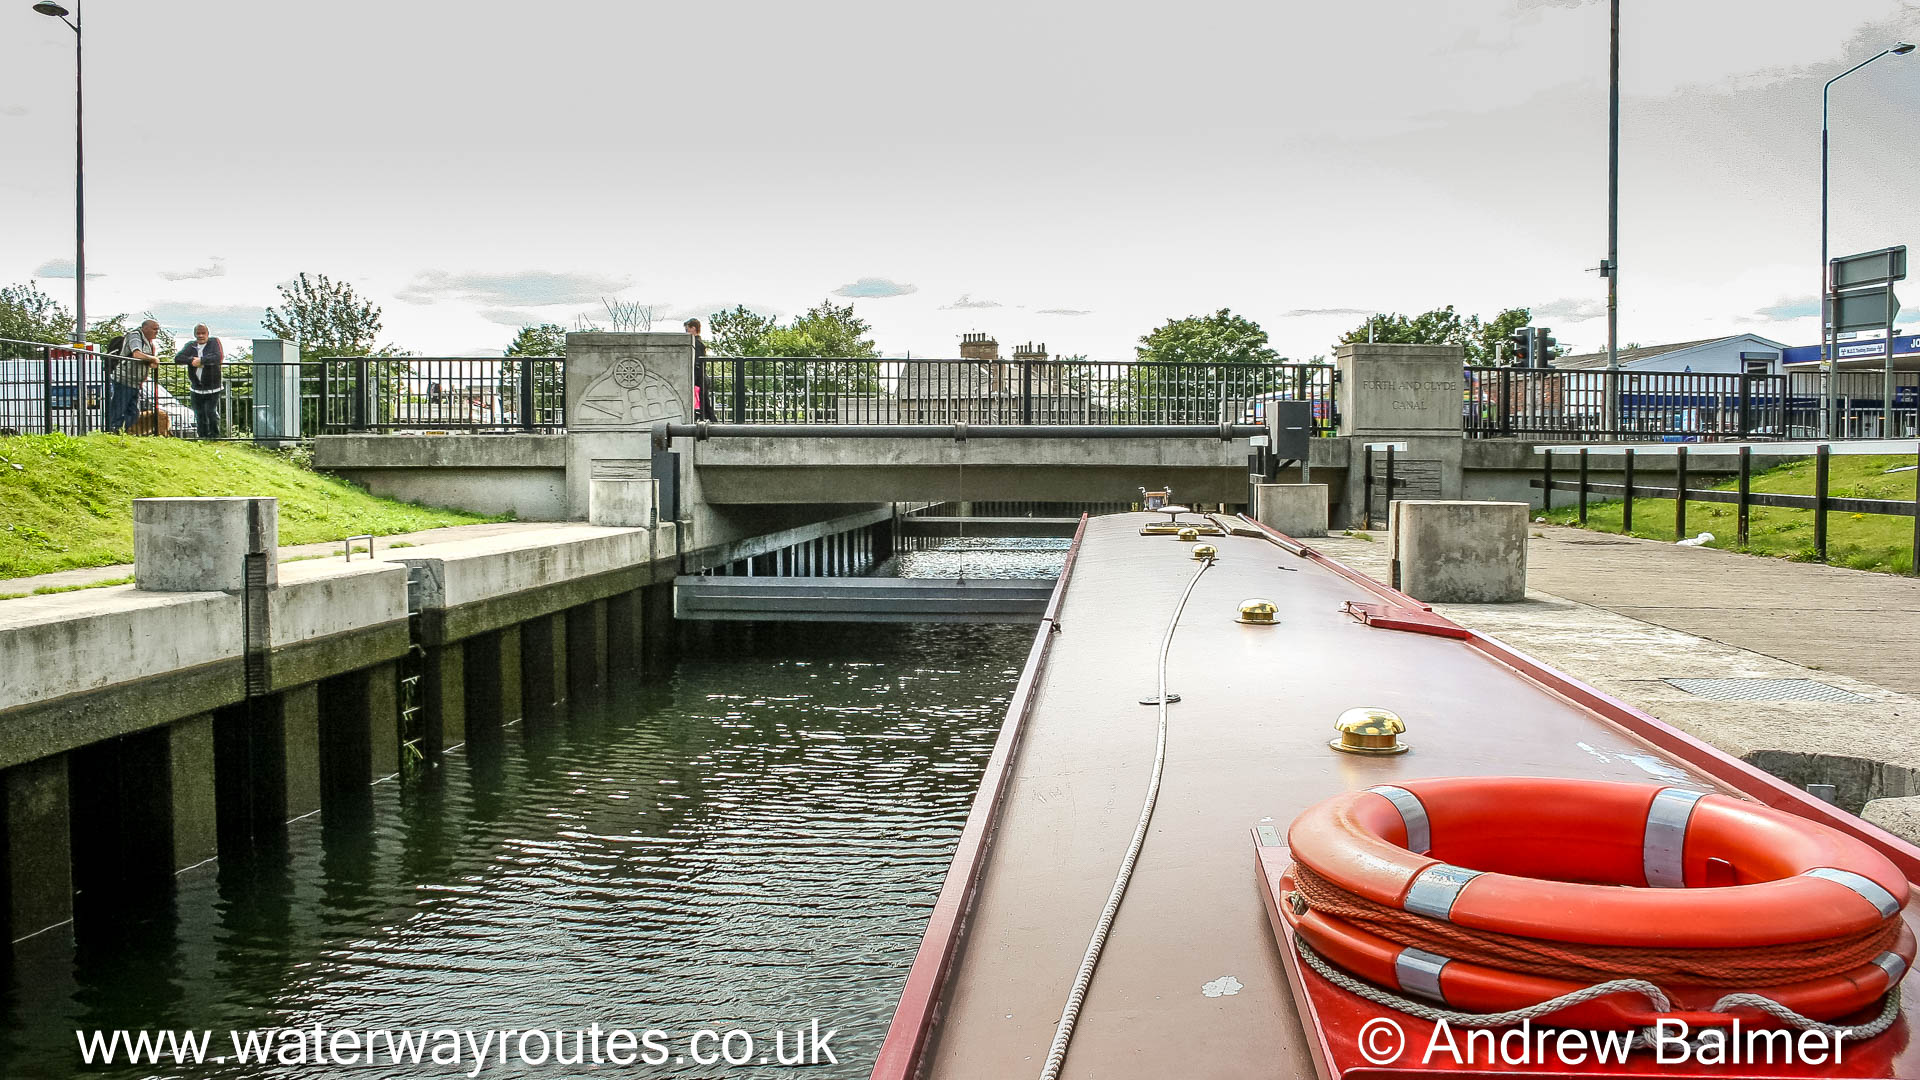 Dalmuir Drop Lock was created when the canal was restored so boats could pass under Dumbarton Road without an opening bridge which would delay traffic